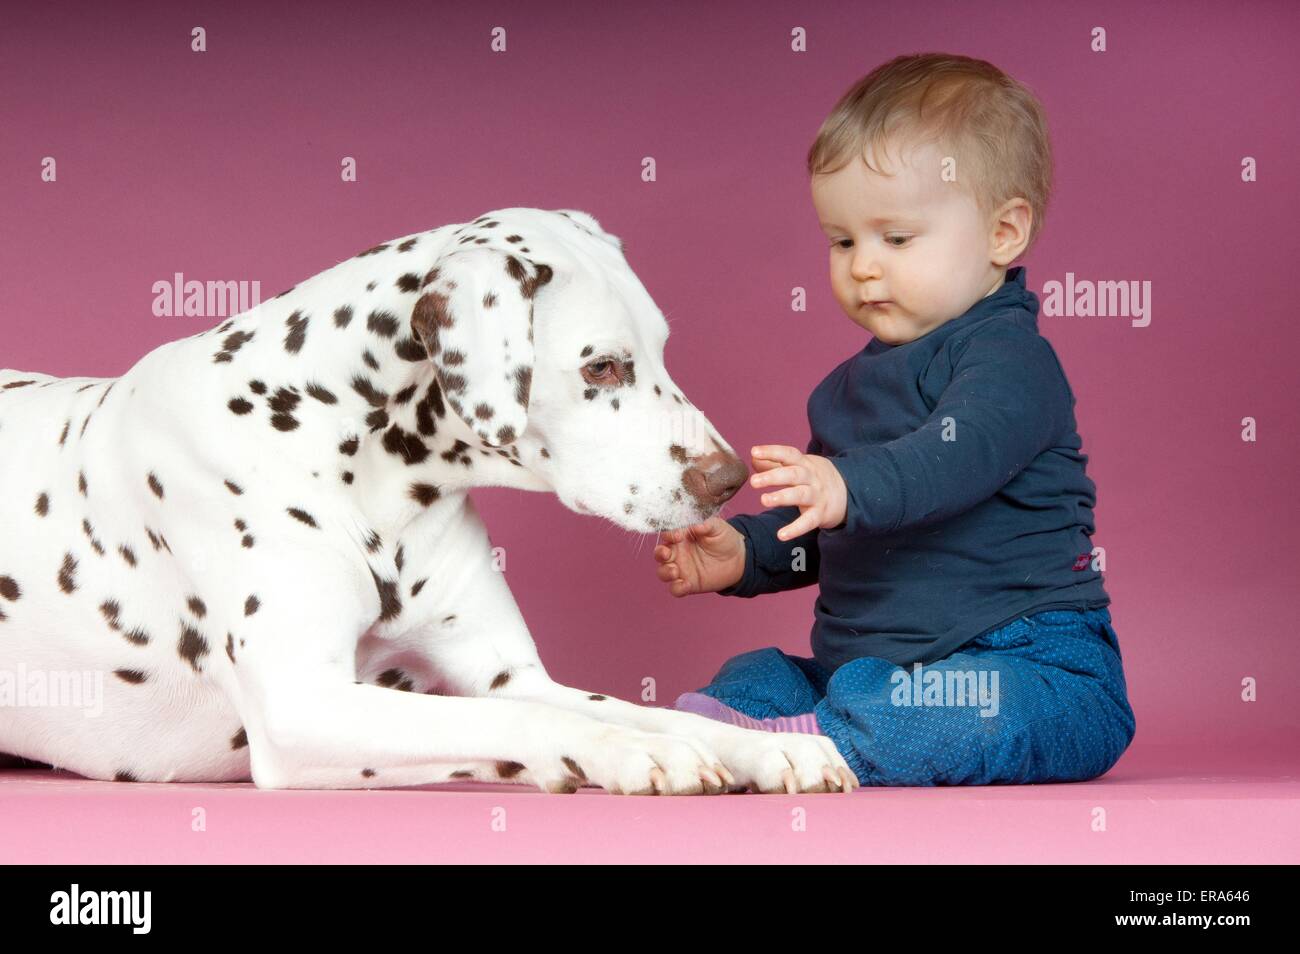 Dalmatian and baby Stock Photo